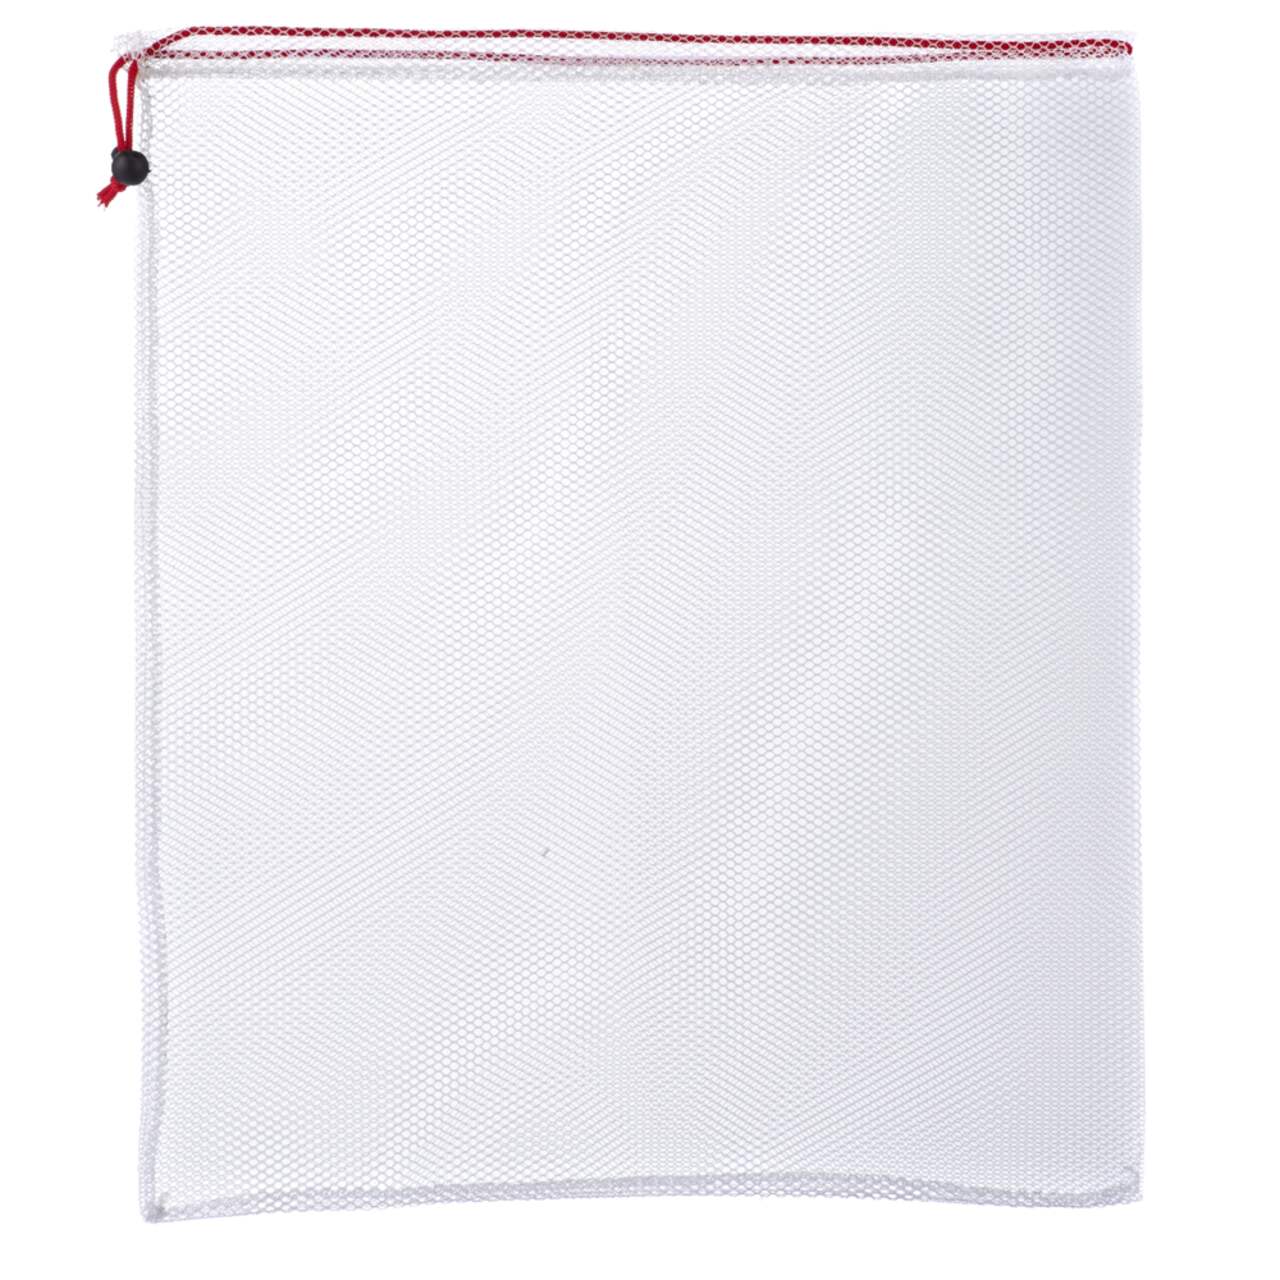 https://media-www.canadiantire.ca/product/playing/camping/camping-accessories/0765648/outbound-mesh-bag-c1a4bb6b-40ea-4f6a-9877-832356e8502e.png?imdensity=1&imwidth=640&impolicy=mZoom